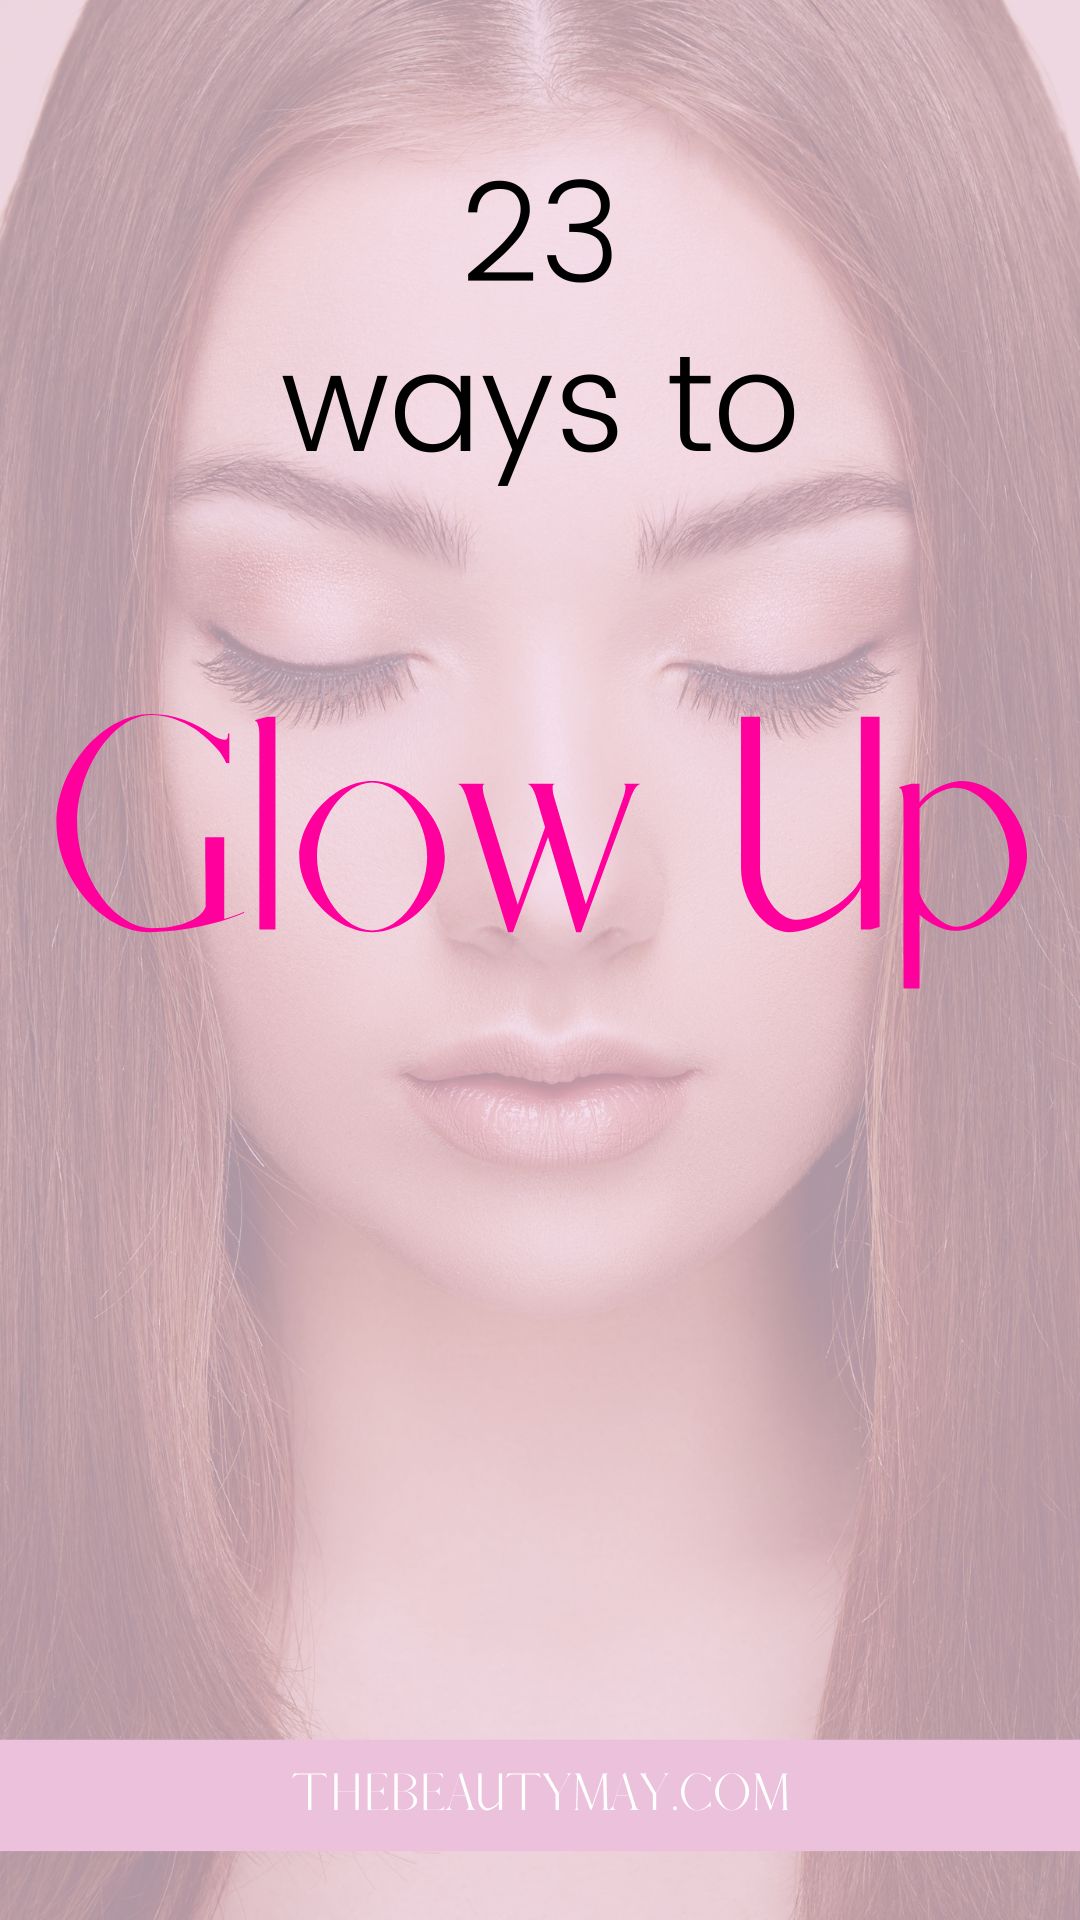 Glow up tips